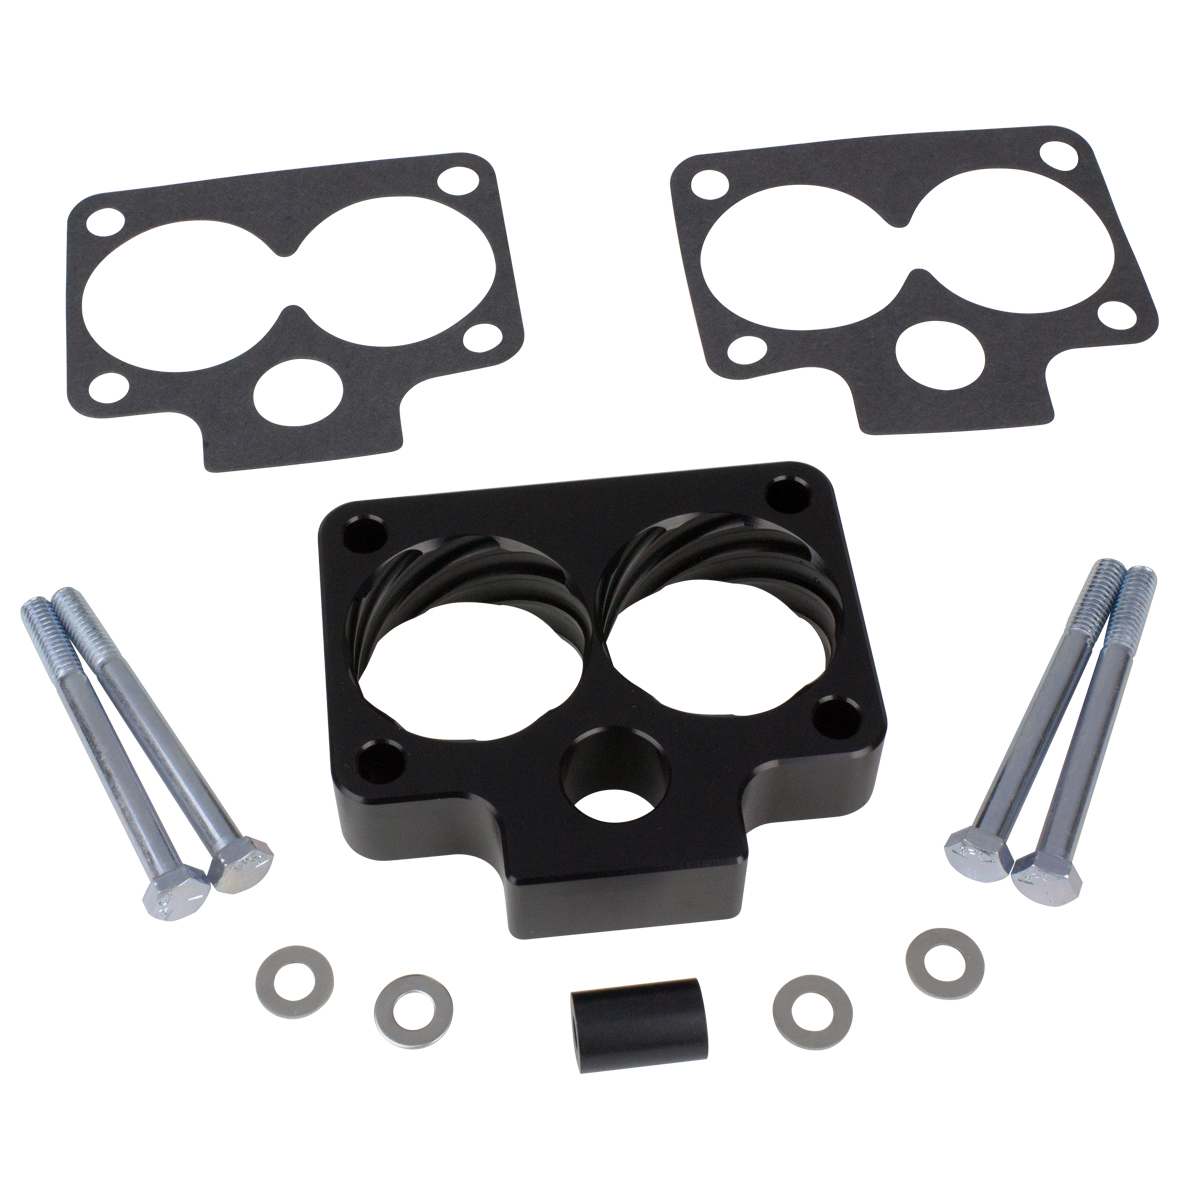 Fits 94-01 Dodge Ram 1500 2WD 4WD Throttle Body Spacer Horsepower Fuel 2001 Dodge Ram 1500 Throttle Body Spacer